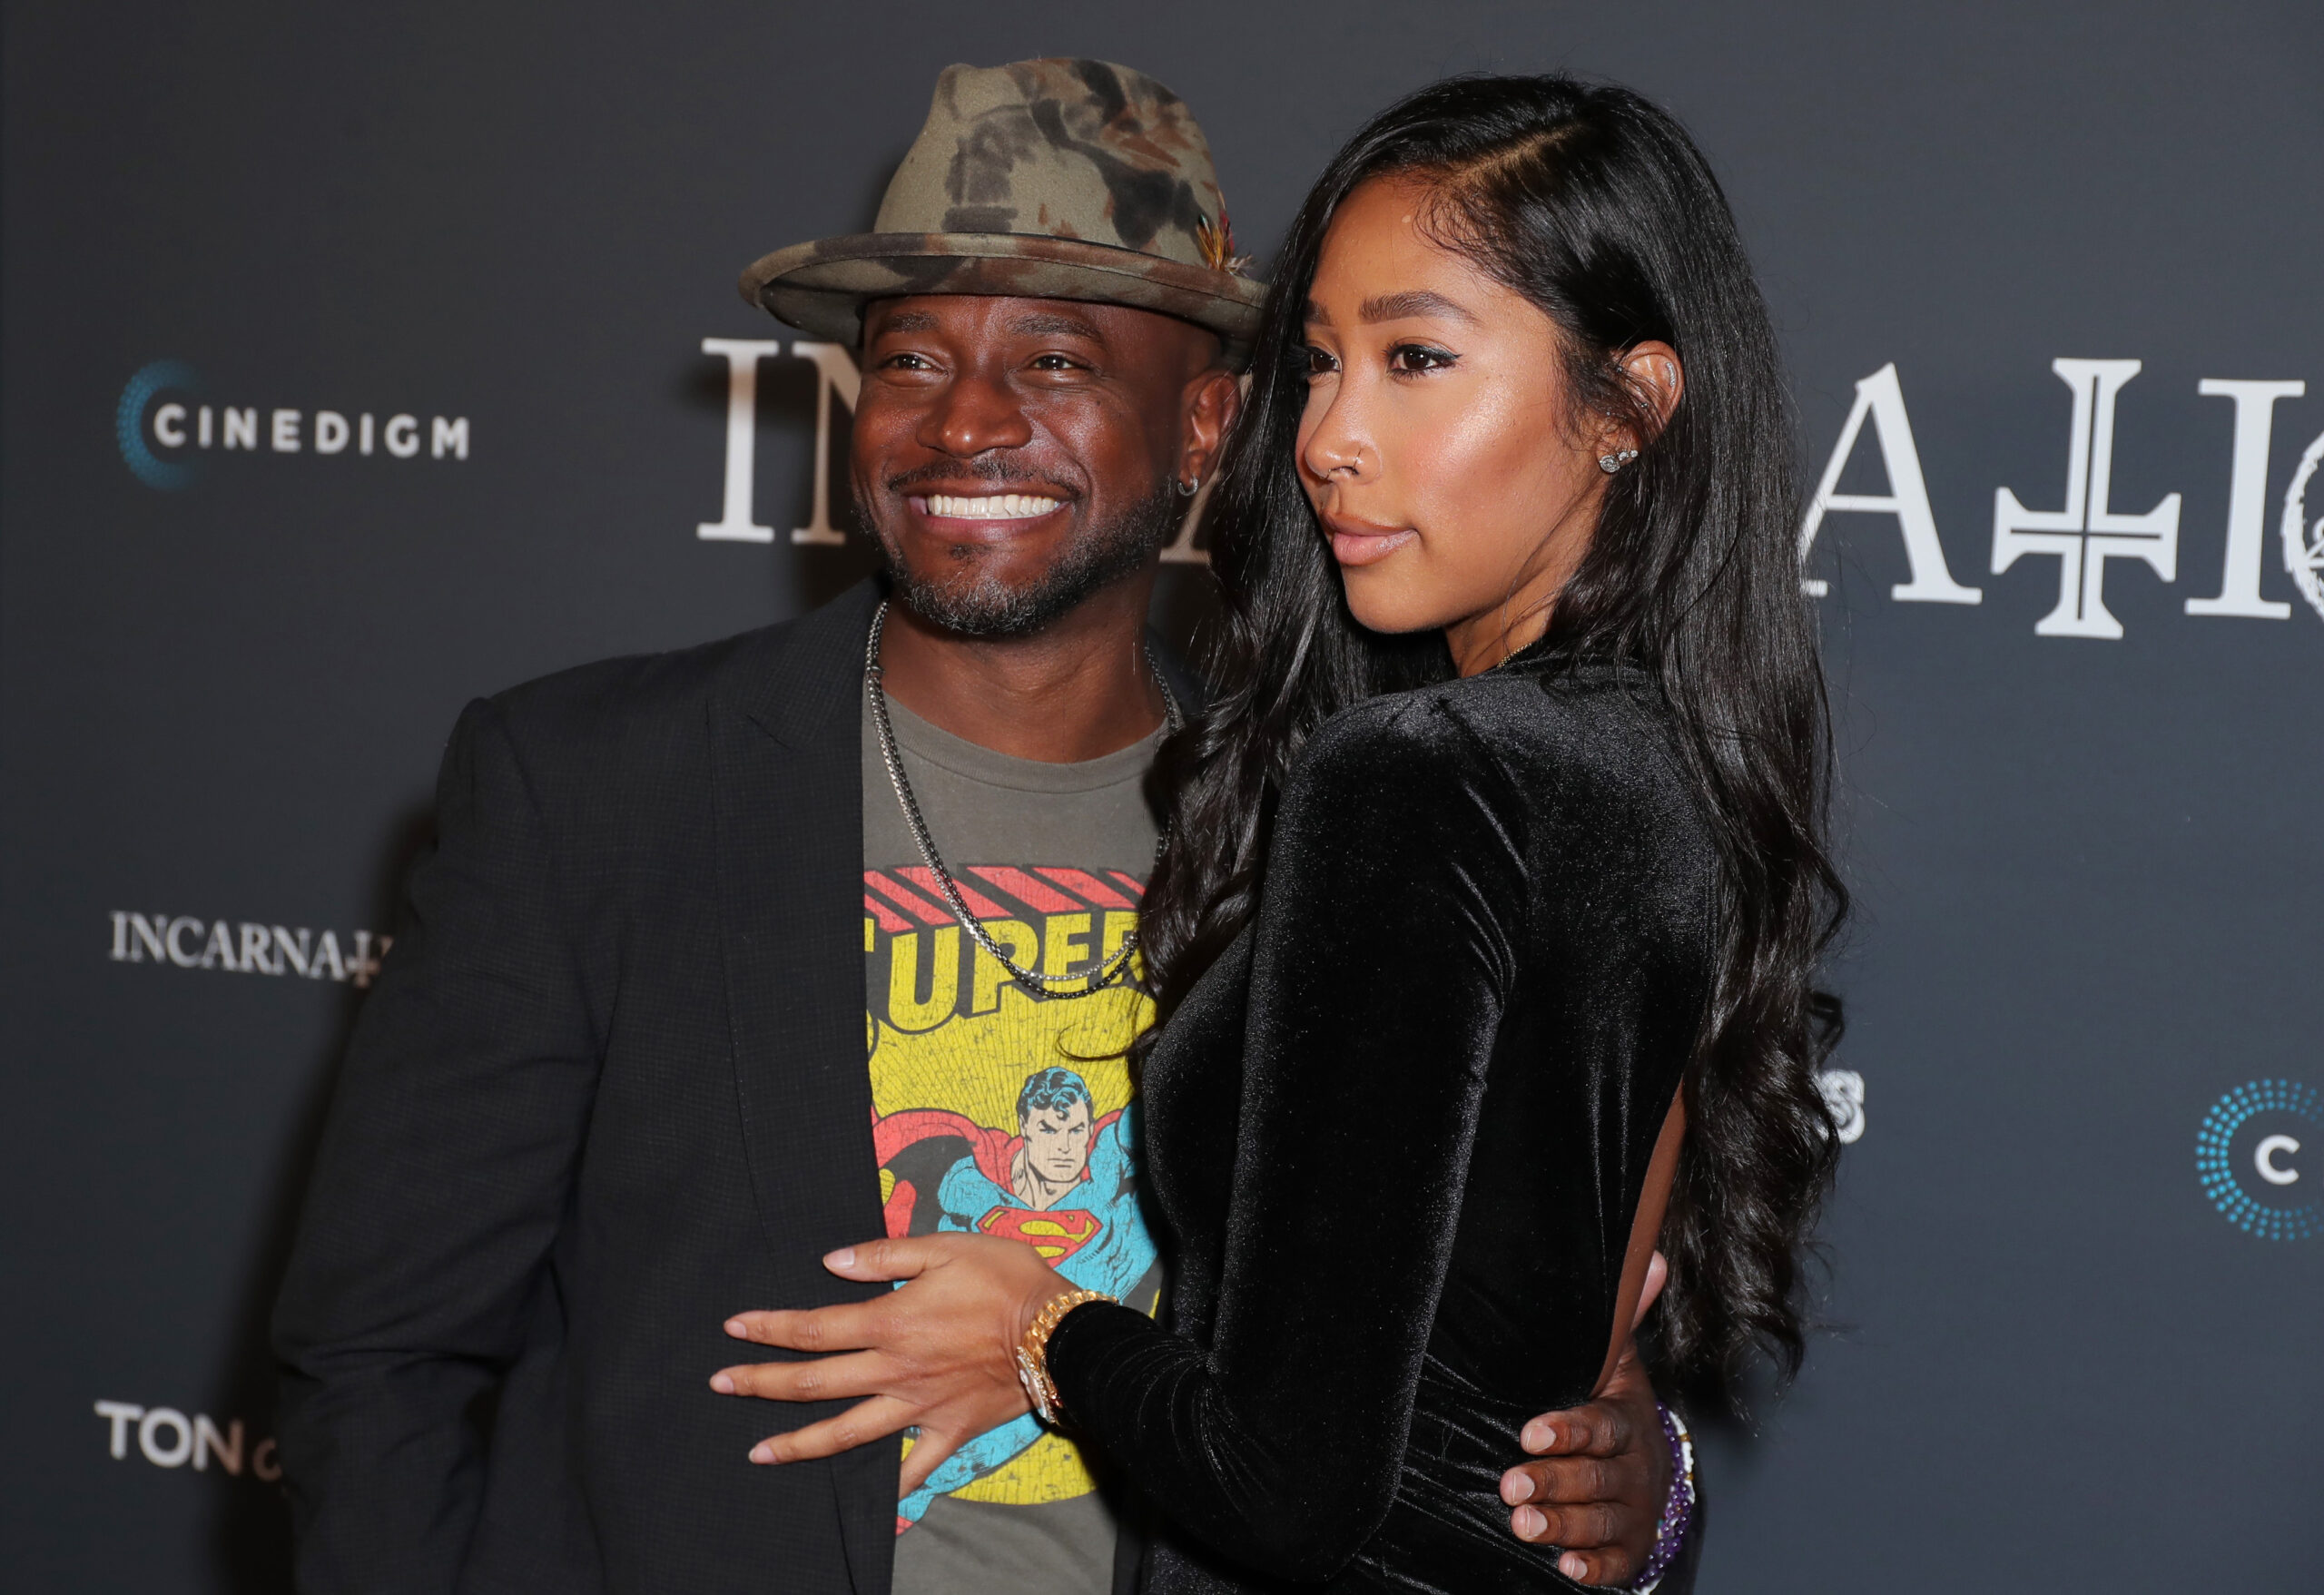 I'm The Lucky One': Taye Diggs and Apryl Jones Gush Over One Another on Social Media, Confirming Their Relationship